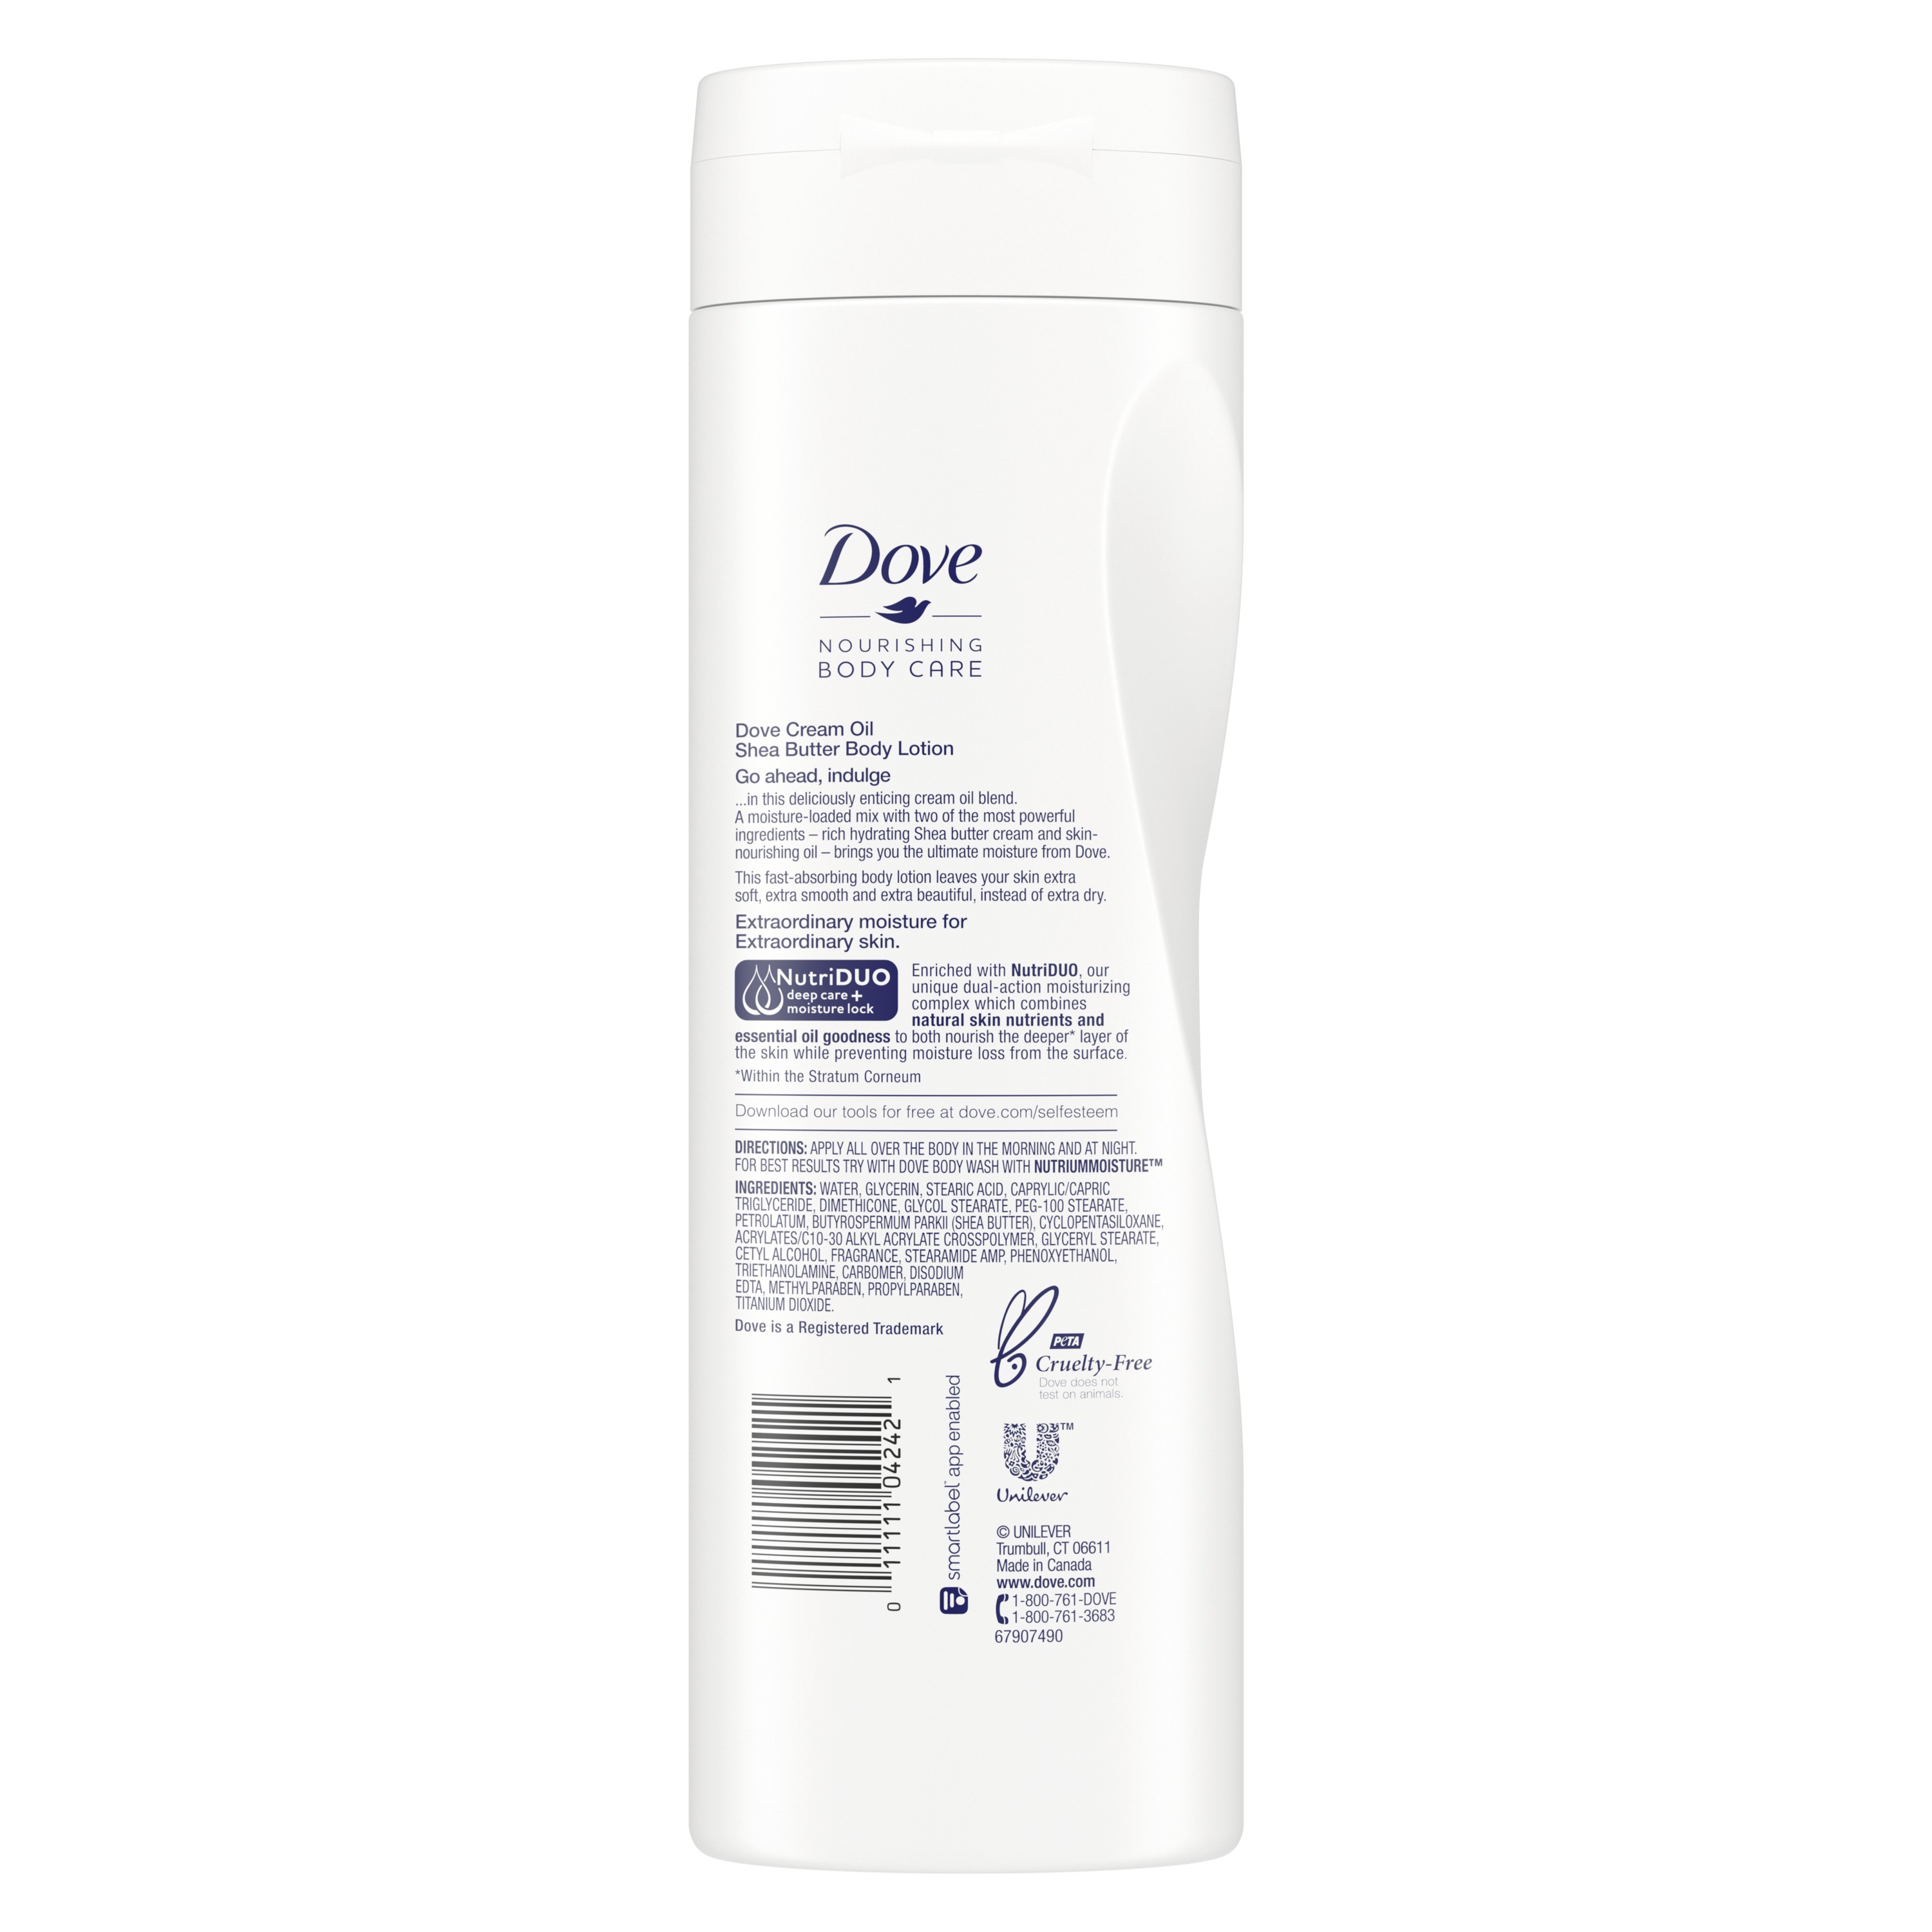 Dove Body Lotion Shea Butter 13.5 oz - image 3 of 9